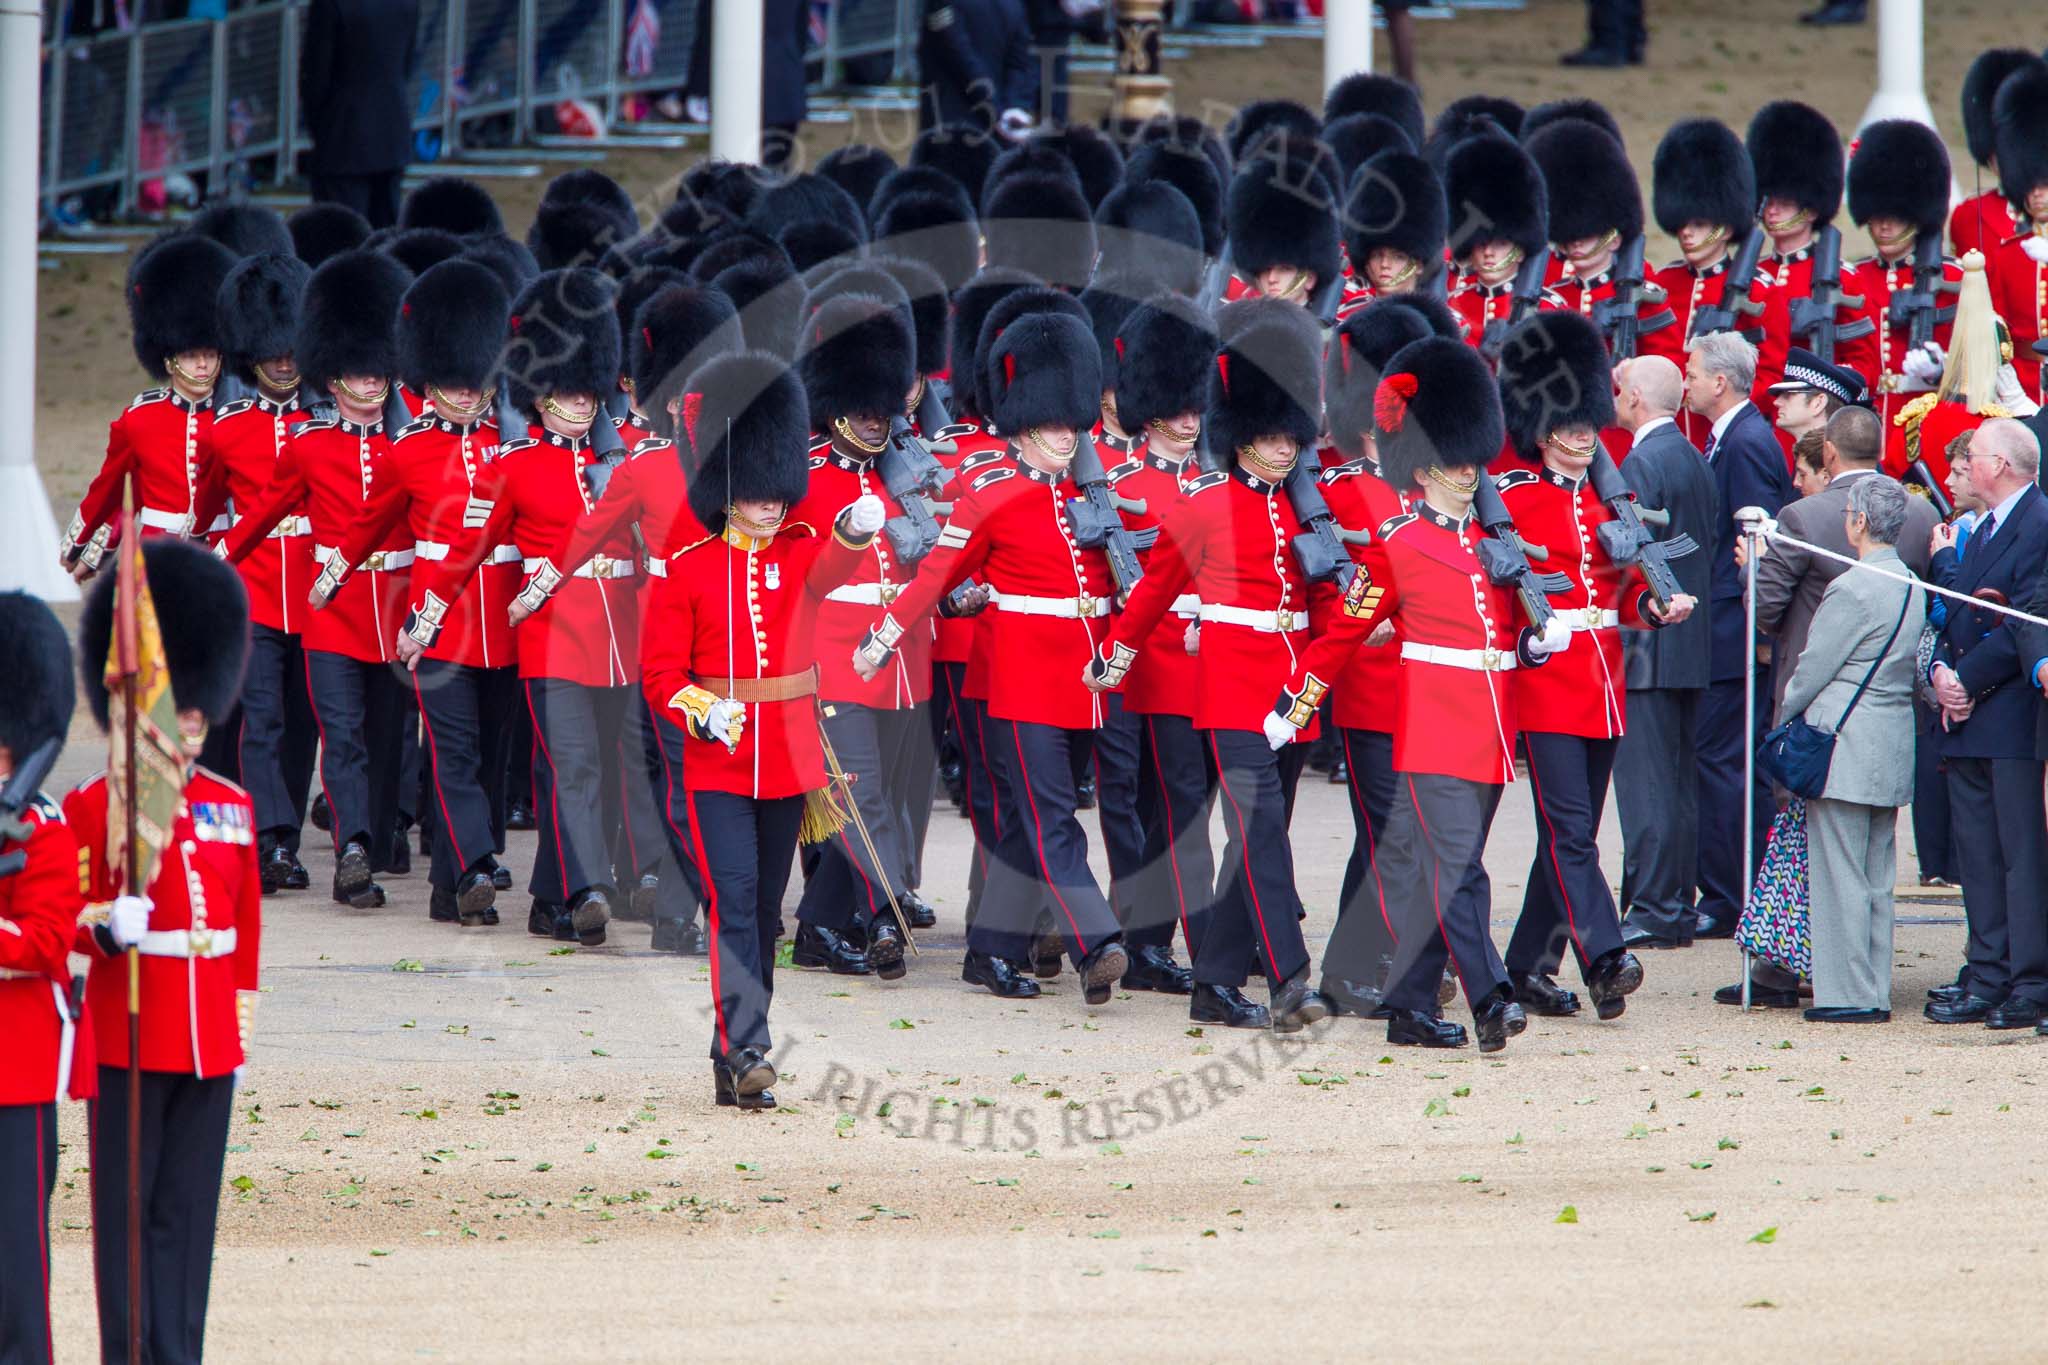 Trooping the Colour 2013: No. 6 Guard, No. 7 Company Coldstream Guards are arriving from The Mall, and turning left onto Horse Guards Parade. Image #71, 15 June 2013 10:22 Horse Guards Parade, London, UK